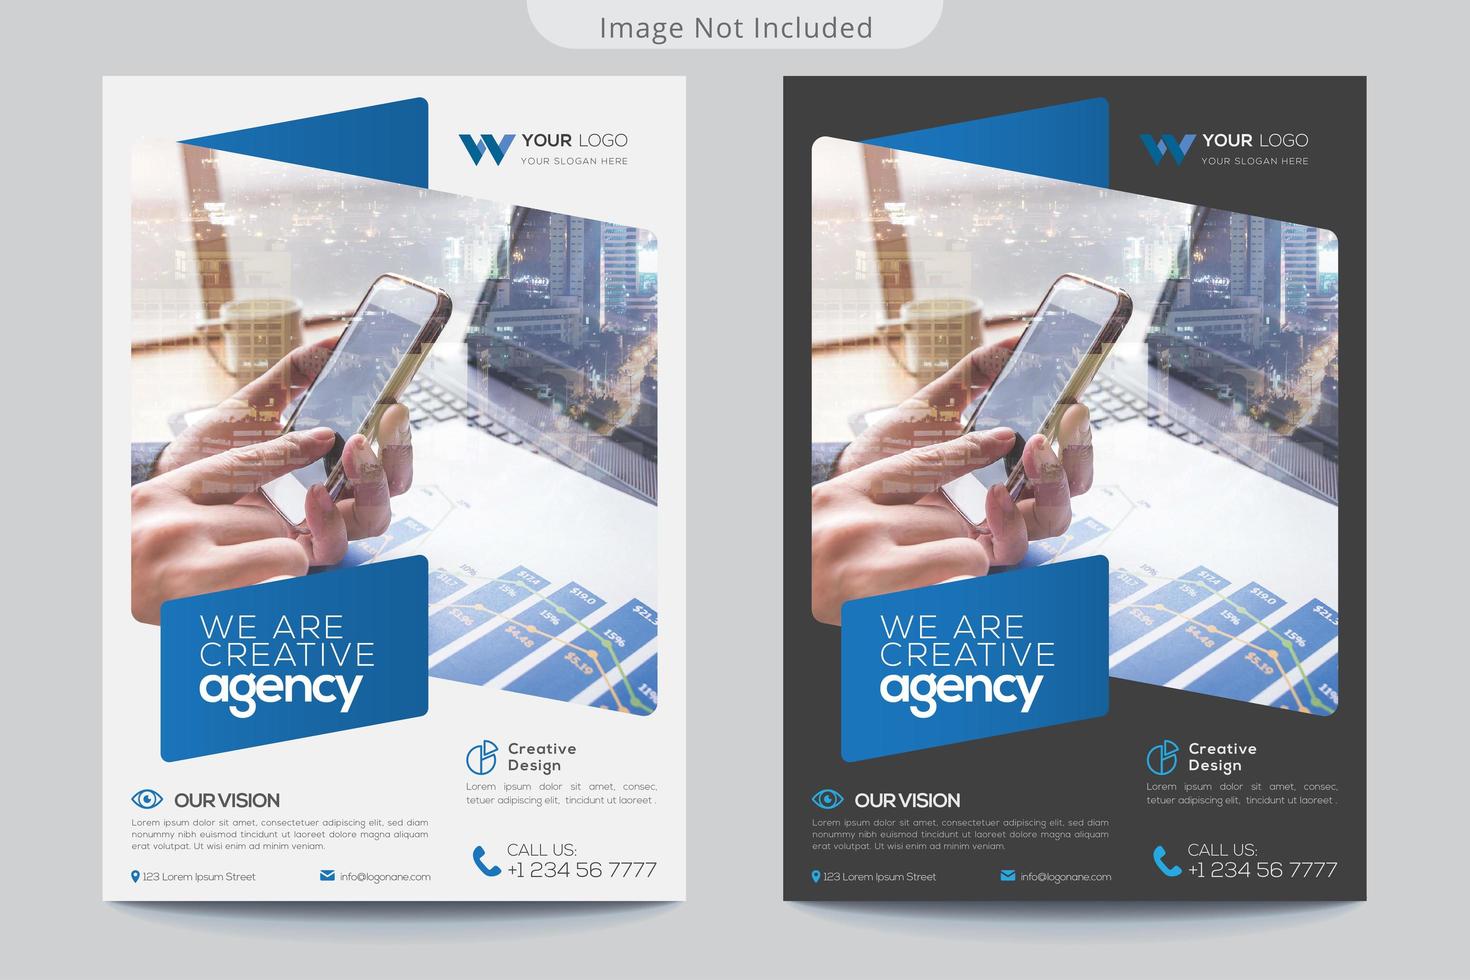 Gray and white flyer templates with blue accents vector